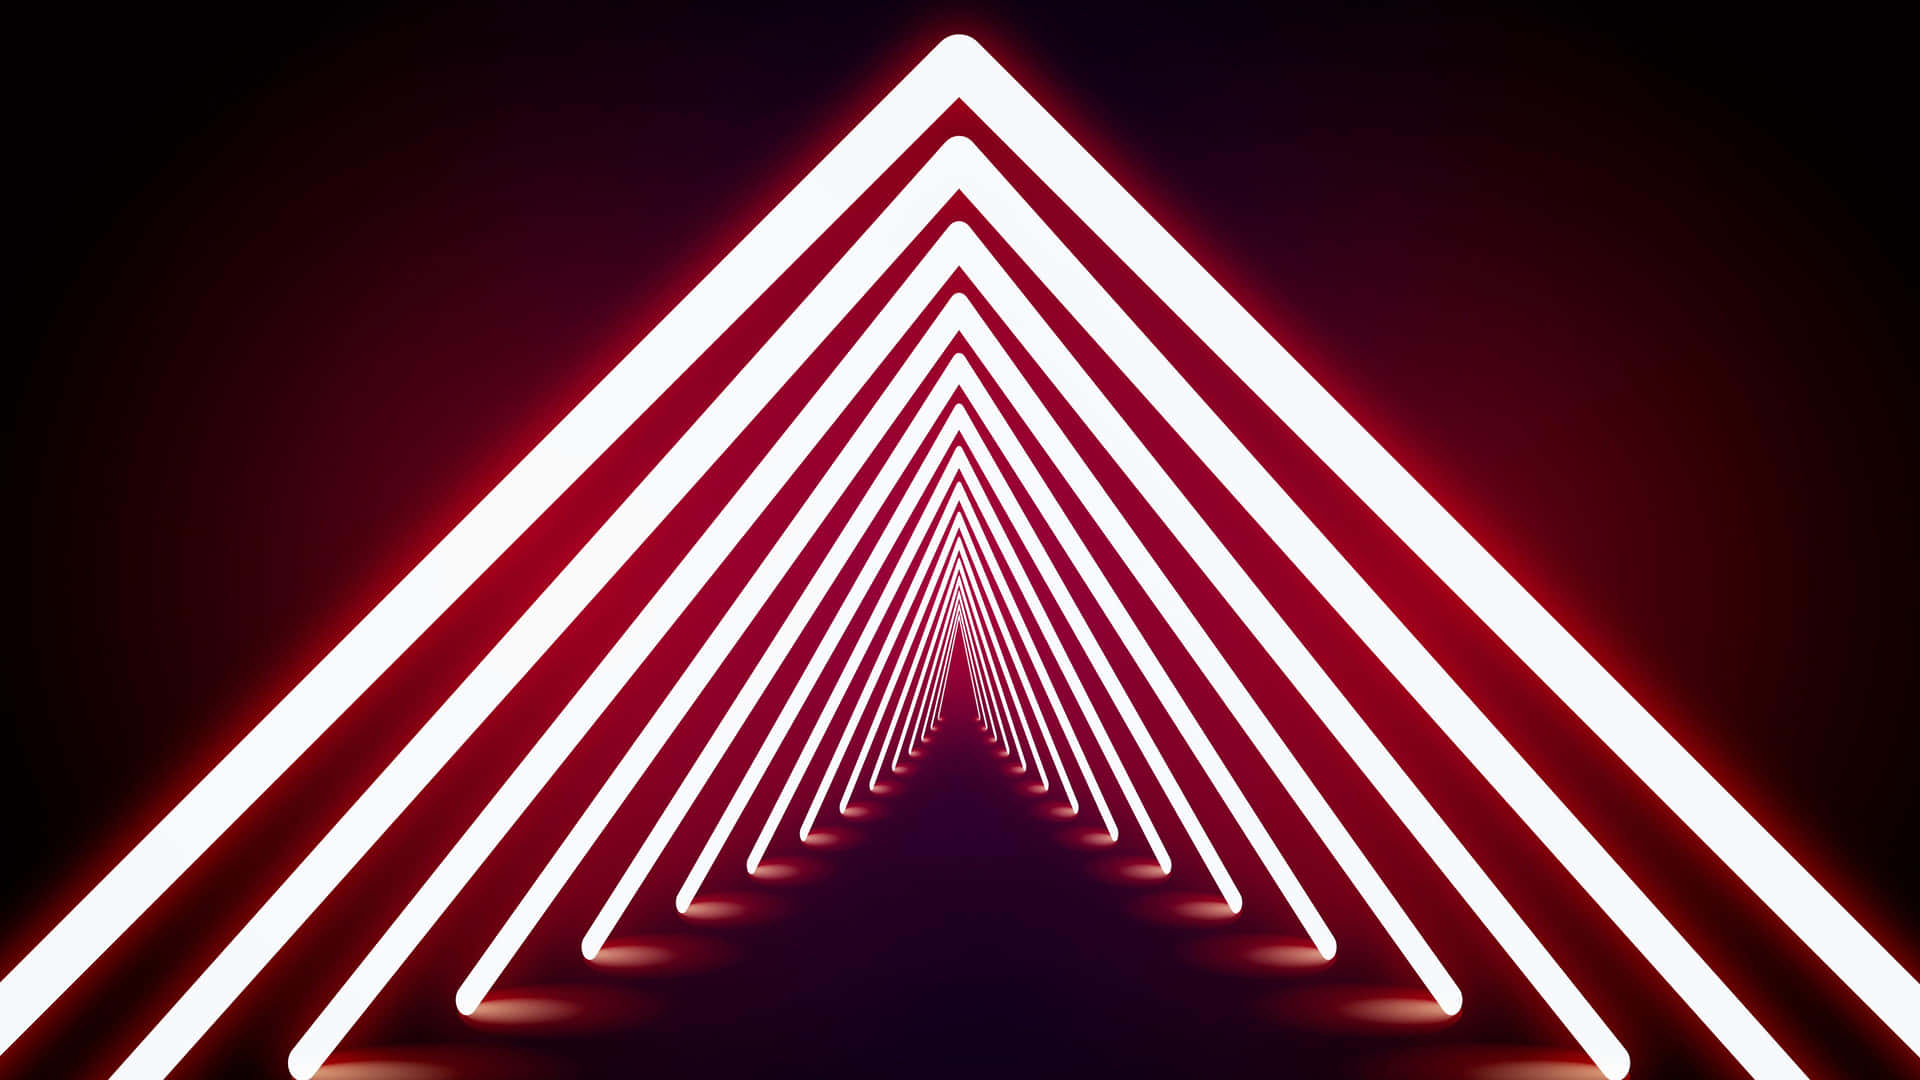 A Triangle With Red And White Lights